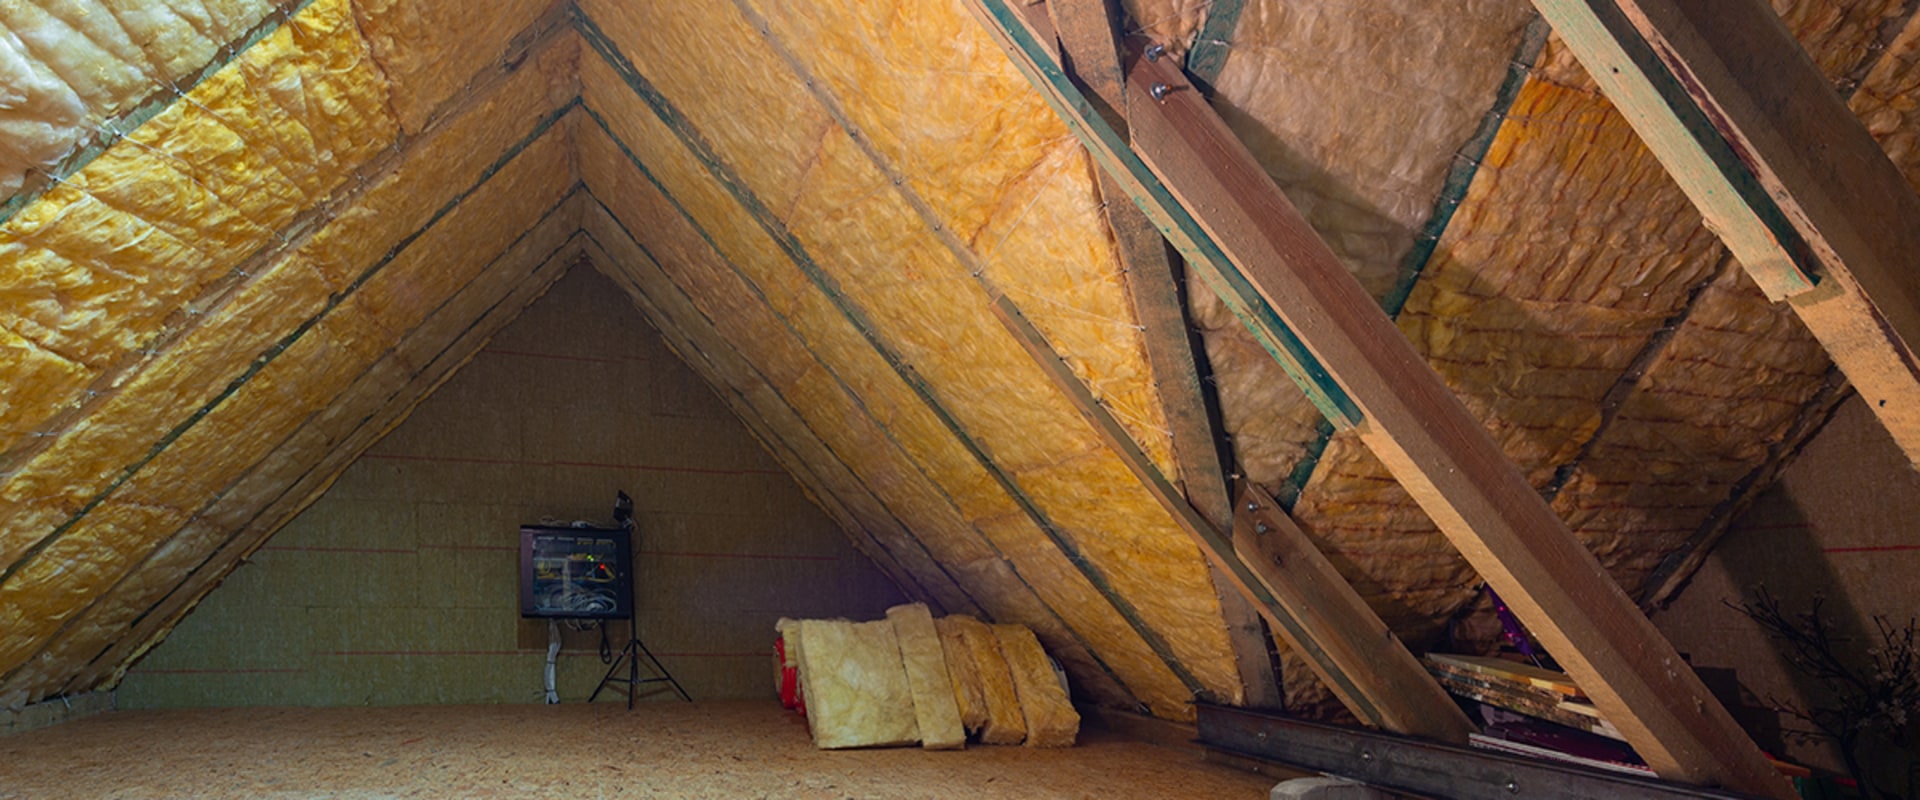 Insulating Your Home in Hot Climates: What You Need to Know